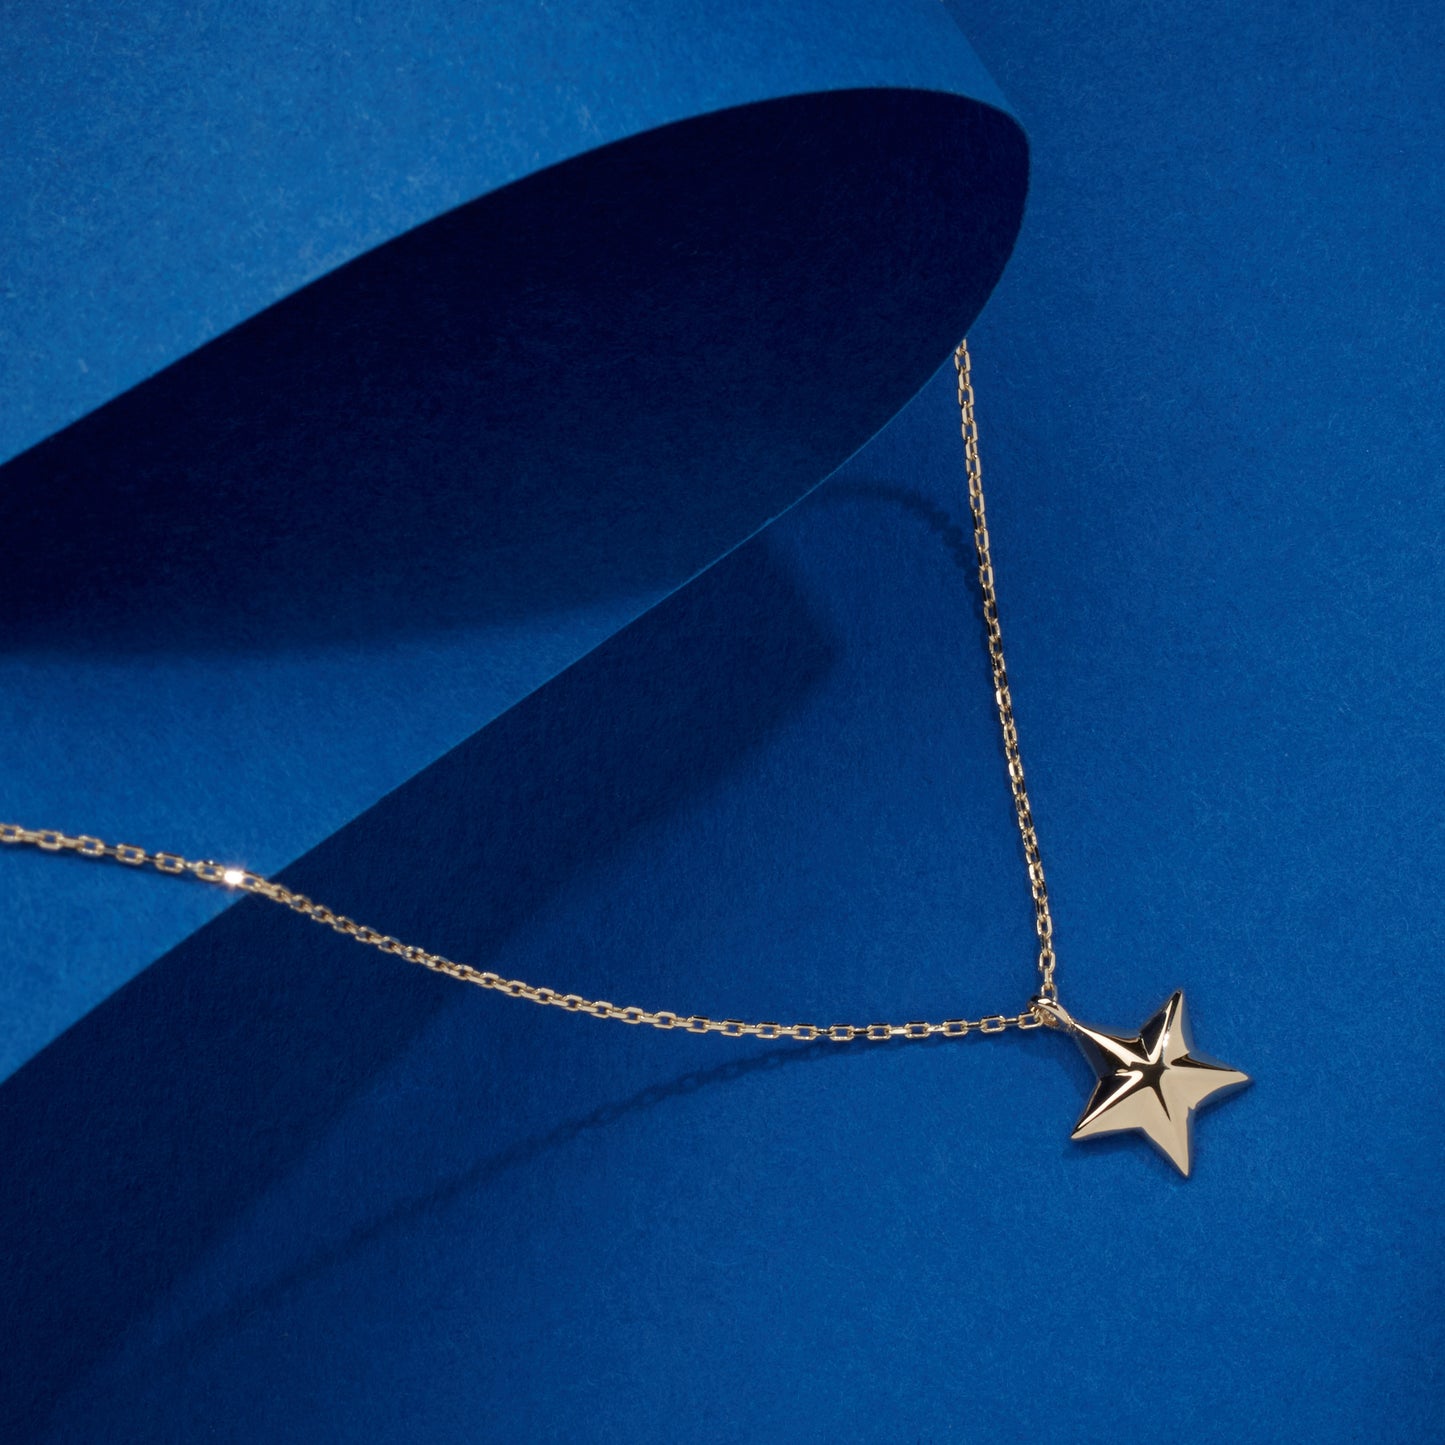 14k gold necklace, gold necklace women, solid gold necklace, 14k gold star pendant, real gold necklace, gold star necklace, 14k star necklace, yellow rose white, tiny star necklace, celestial necklace, birthday gift, gold star pendant , shiny star necklace, 